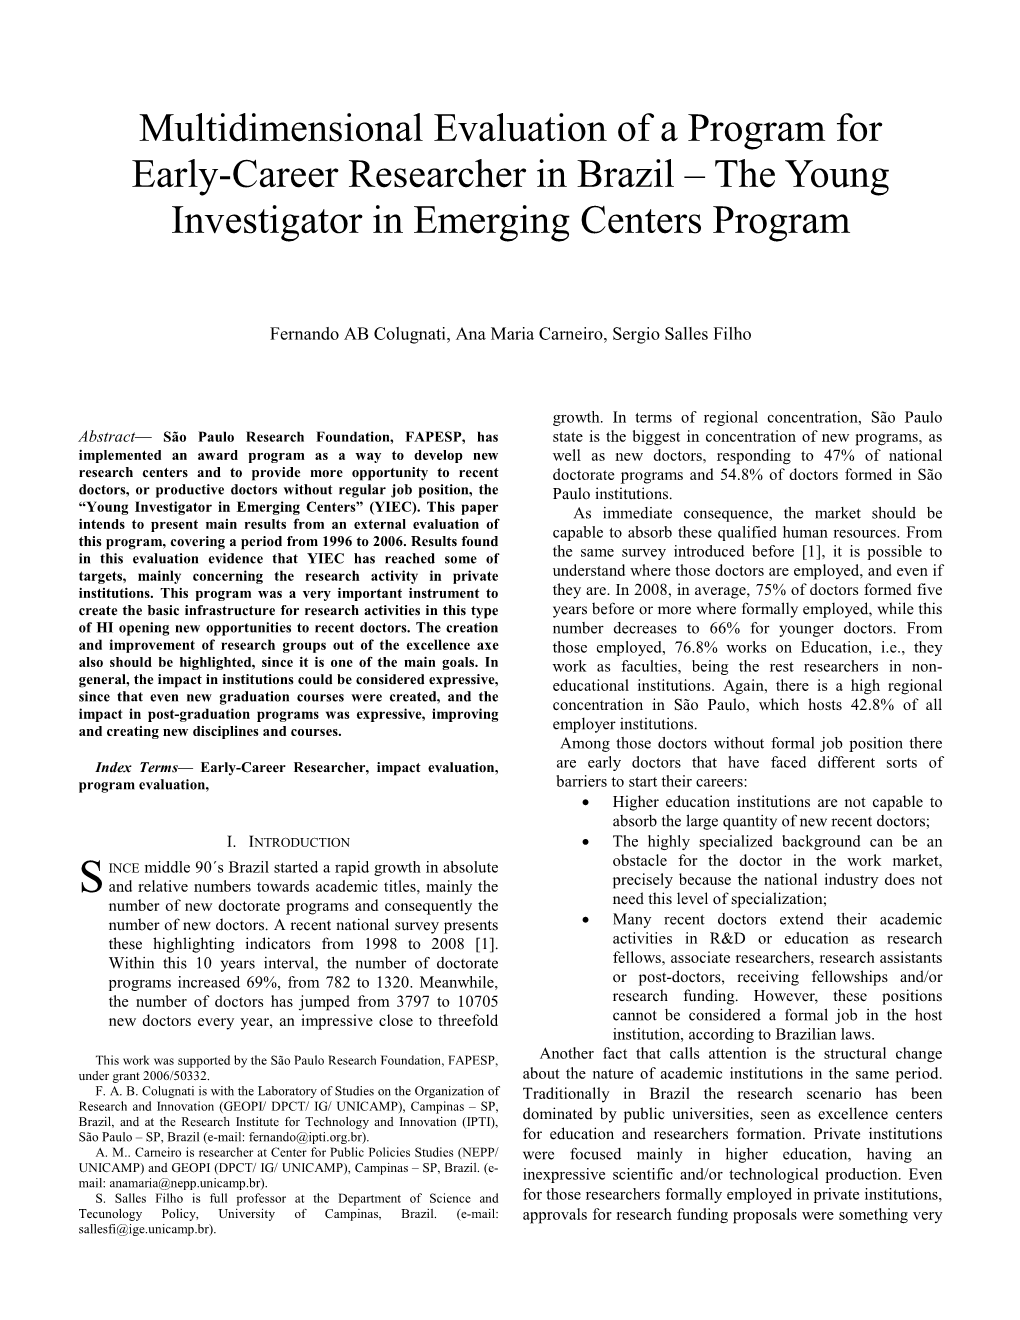 Multidimensional Evaluation of a Program for Early-Career Researcher in Brazil – the Young Investigator in Emerging Centers Program